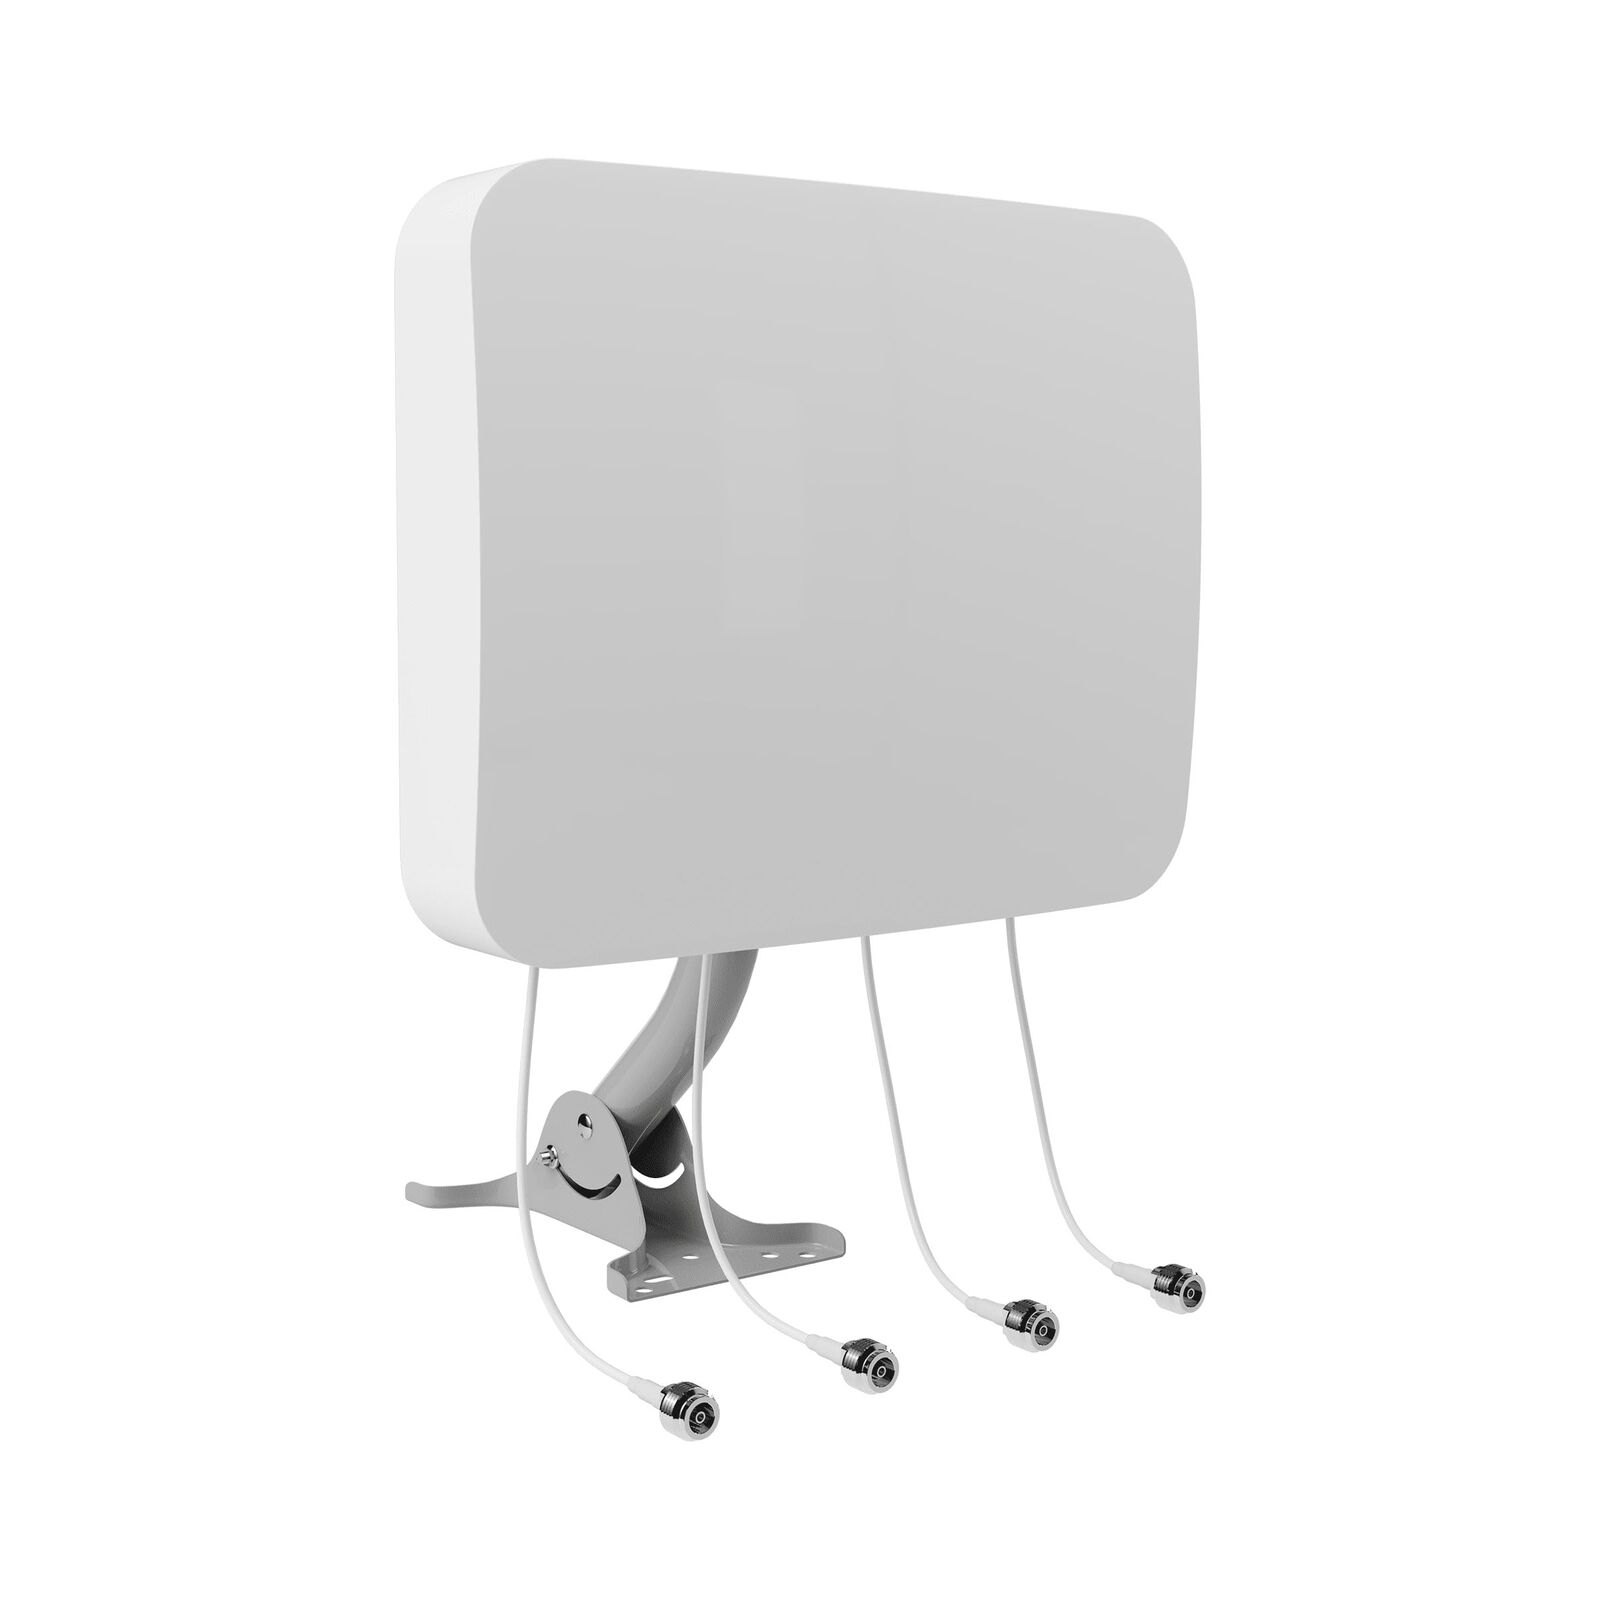 Waveform MIMO 4x4 Panel Antenna Kit for 4G & 5G Cellular Hotspots, Routers, &...